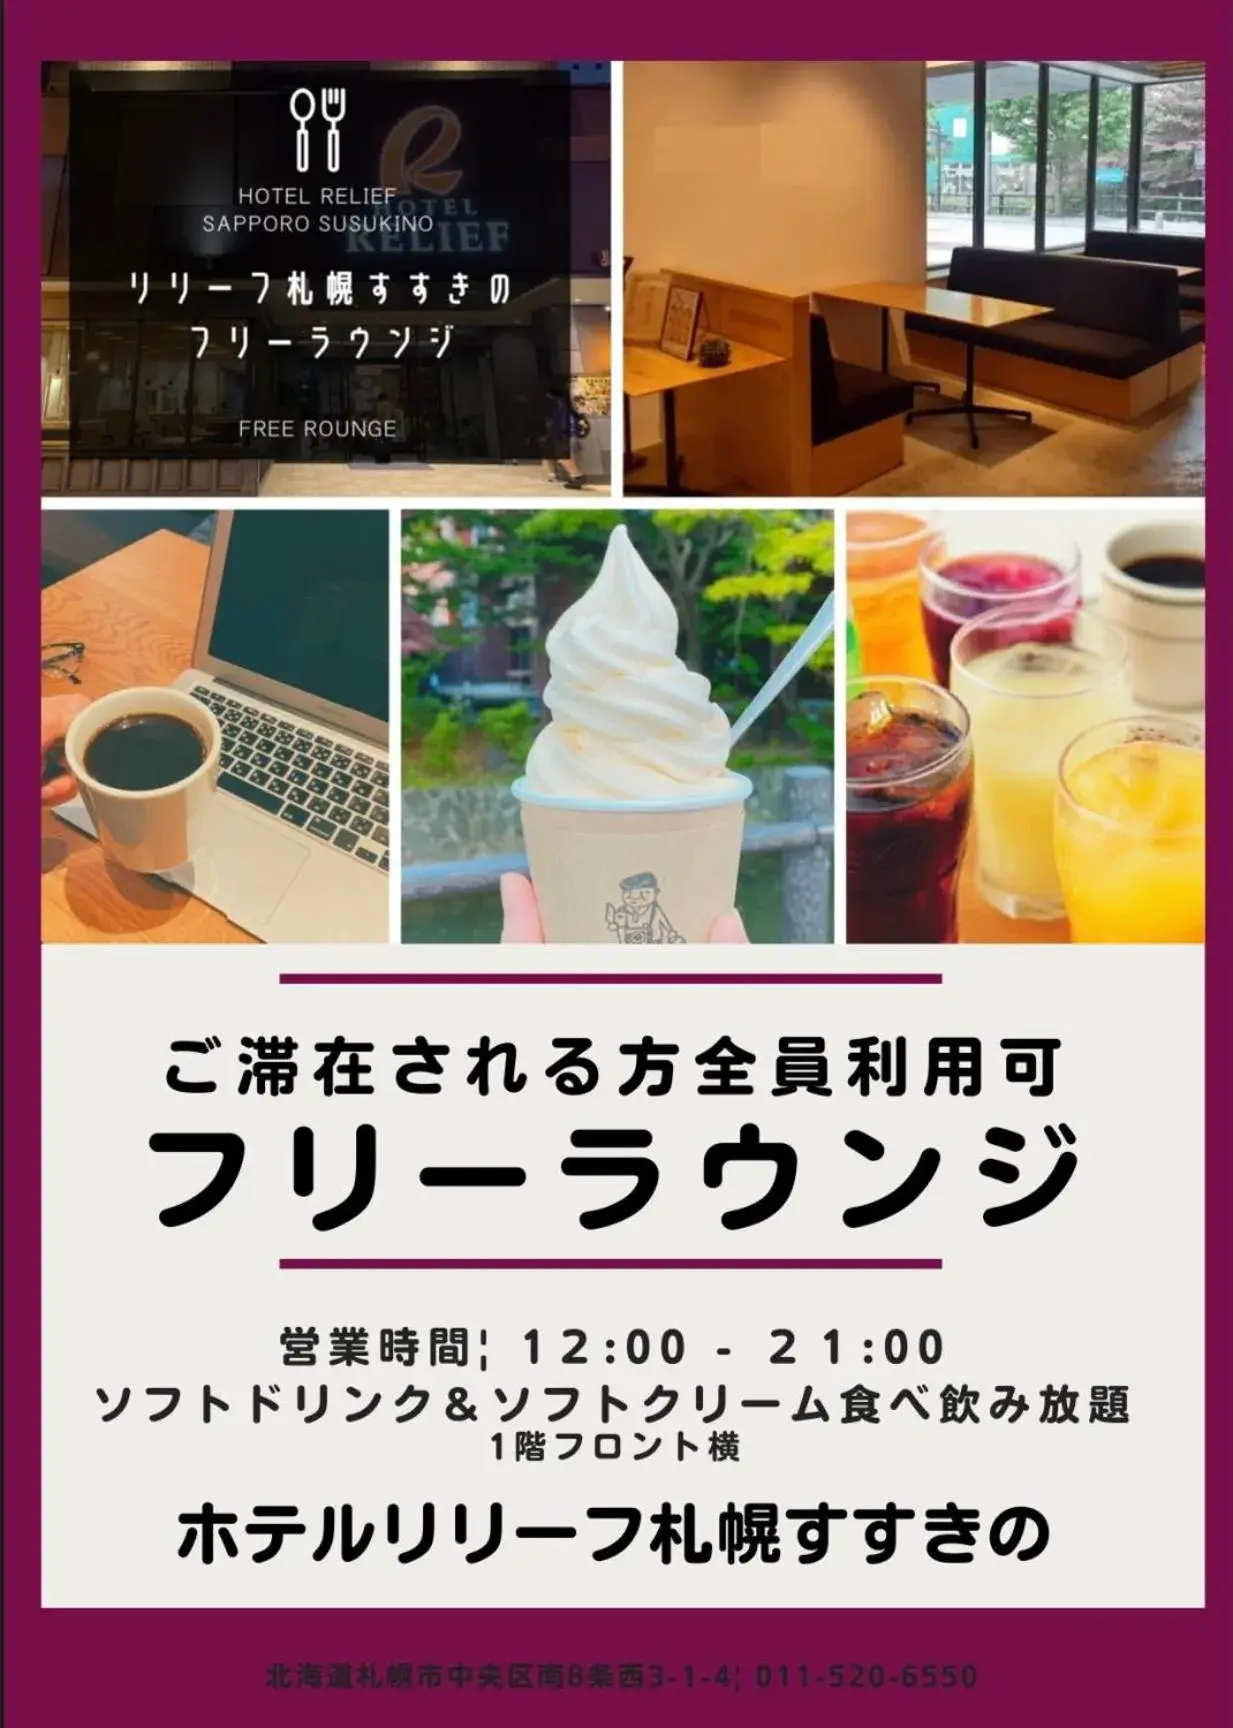 Restaurant/places to eat in Hotel Relief Sapporo Susukino